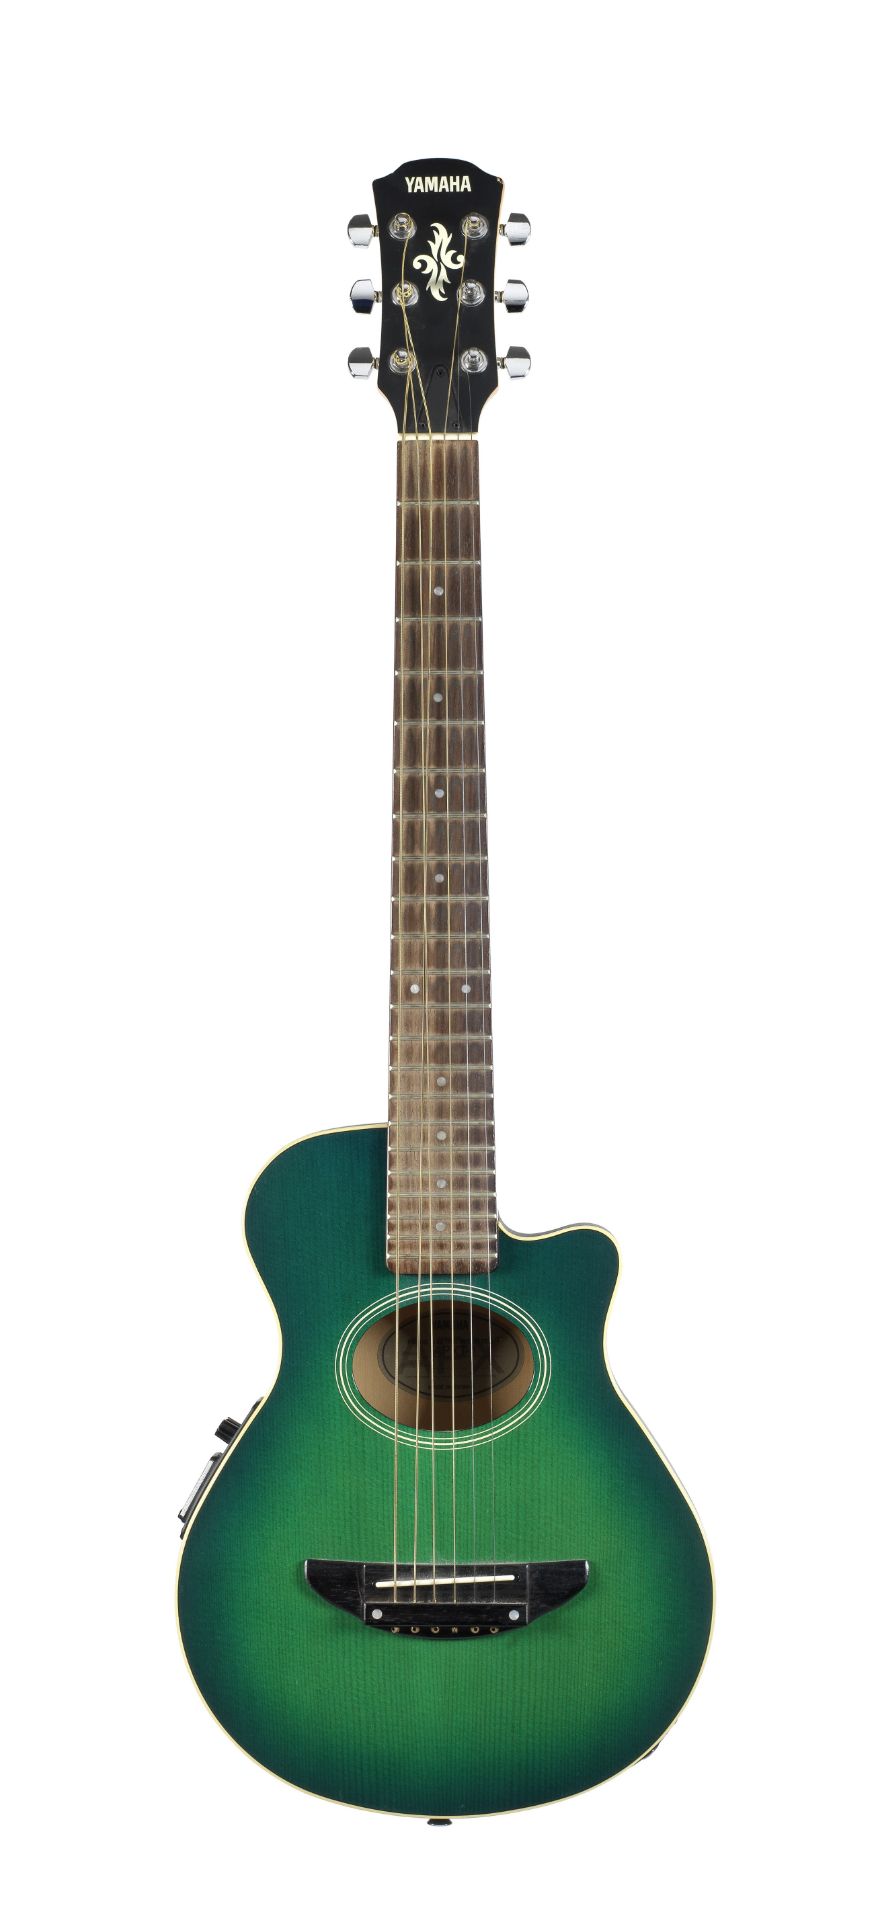 The Libertines / Carl Barât: a Yamaha APXT-1 acoustic electric guitar owned and played by Carl Ba...